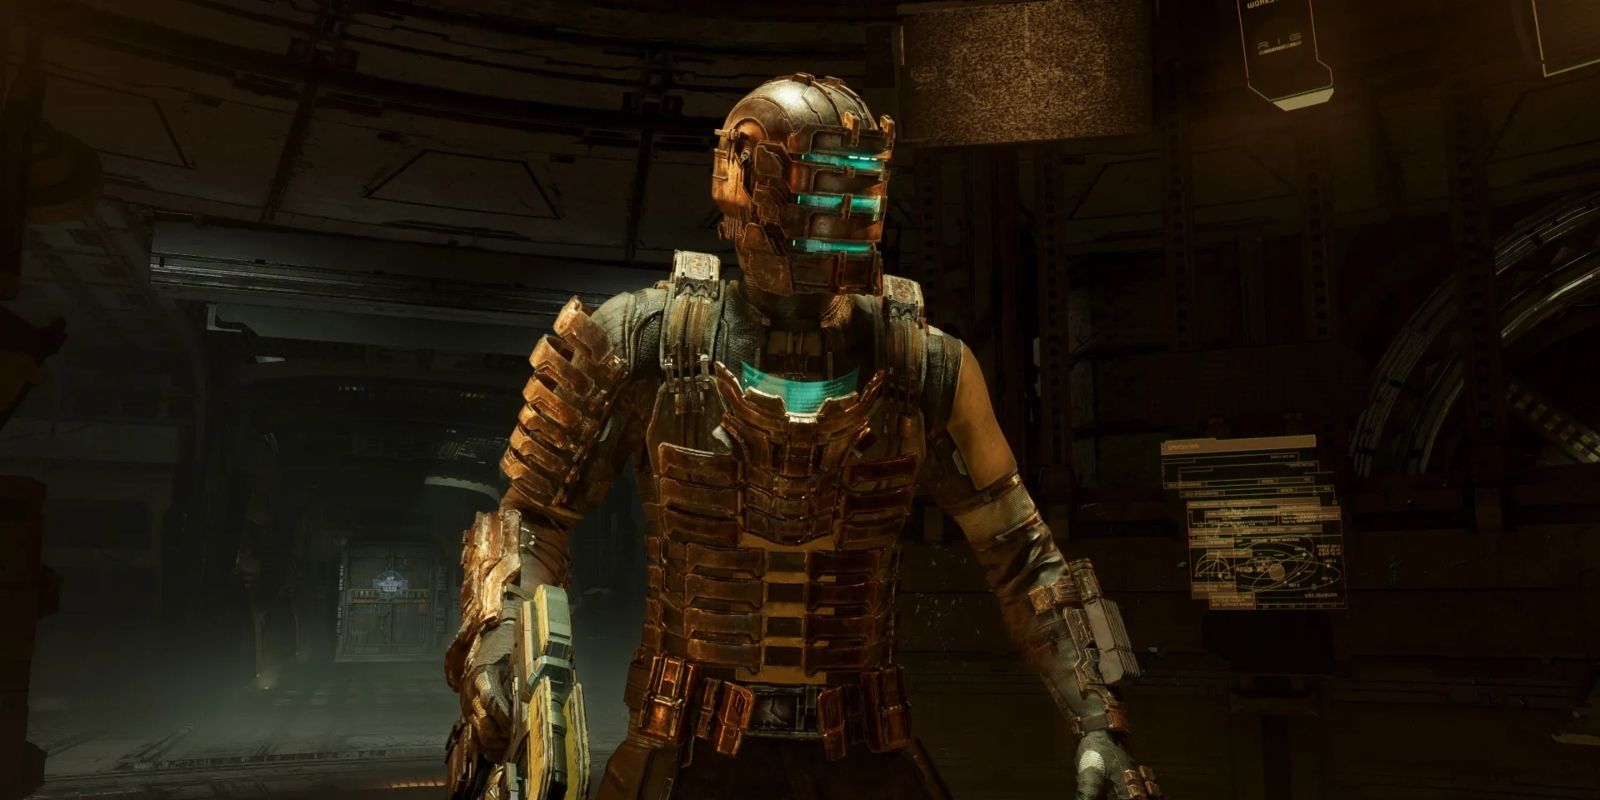 The main character from Dead Space - Isaac waling through a space station